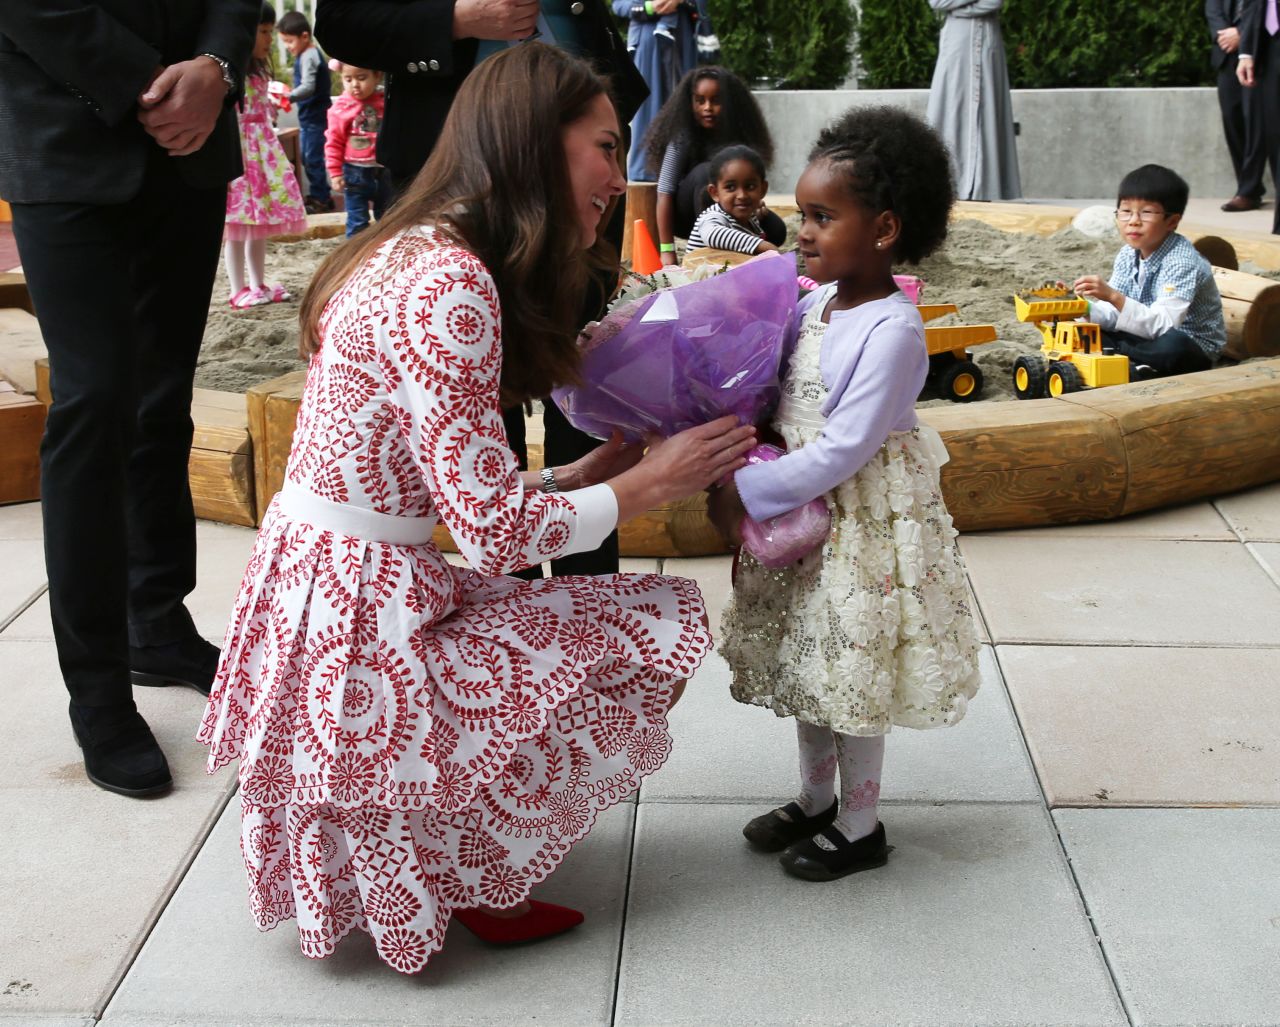 Catherine receives flowers from a young girl at the welcome center of the Immigrant Services Society of British Columbia.